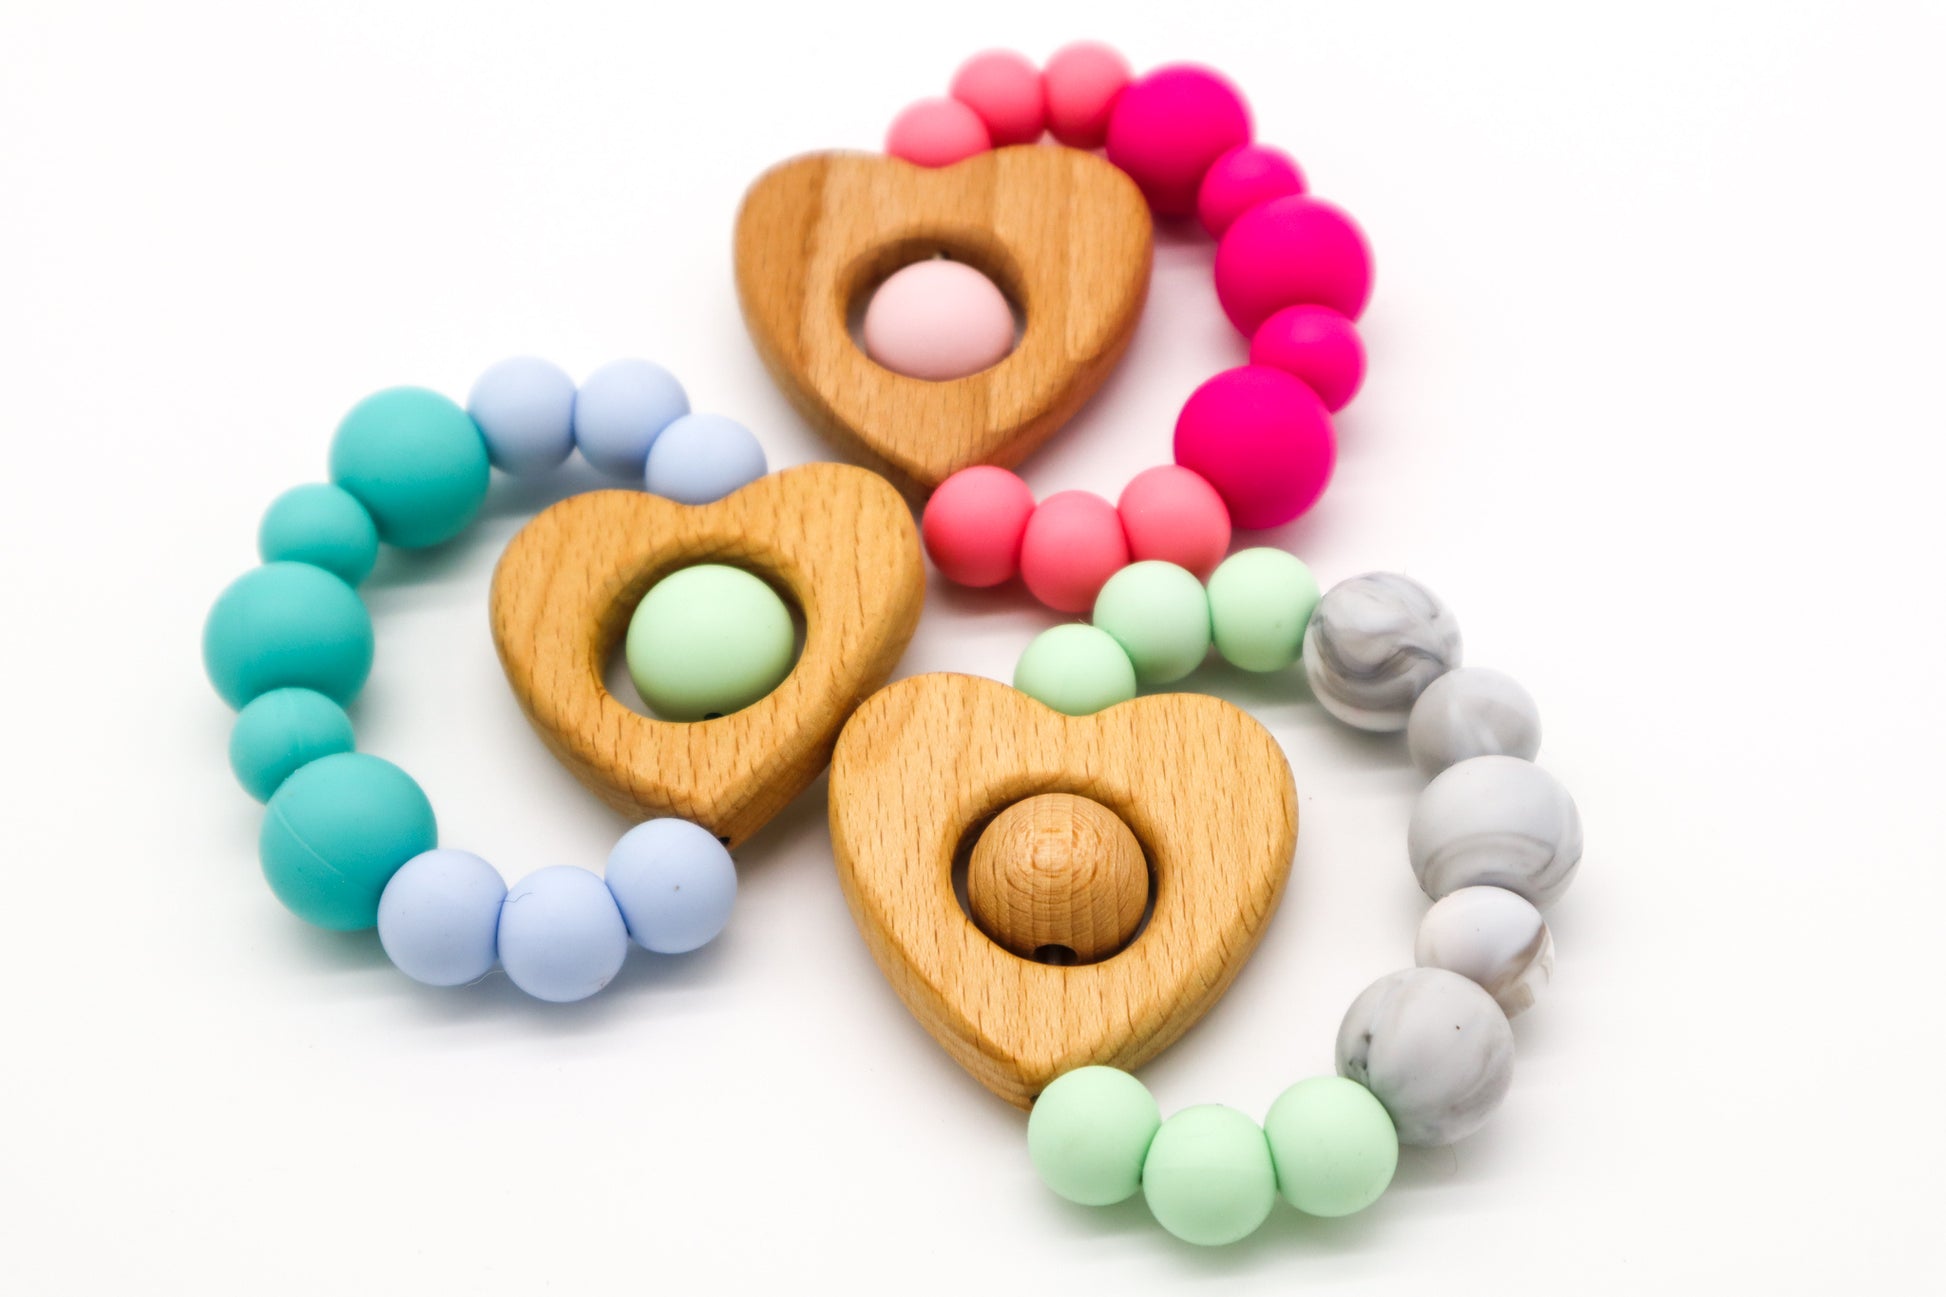 Valentino Teething Toy blue, pink, mint. Silicone and timber teether for babies